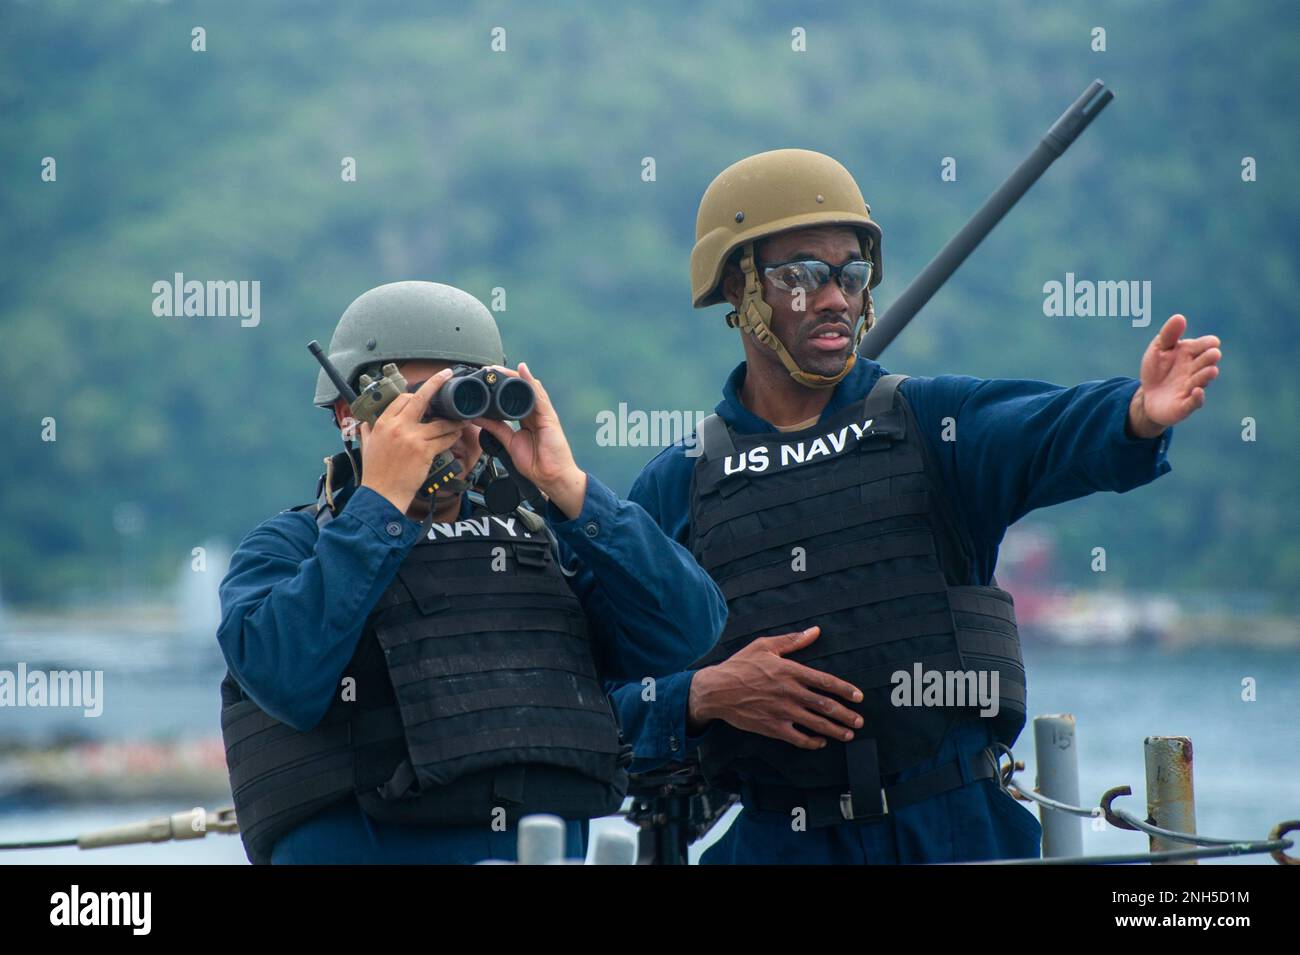 KOTA KINABALU, Malaysia (July 17, 2022) Gunner’s Mate 3rd Class Jonathan Marmolejo (left), from Los Angeles, and Torpedoman’s Mate 1st Class Mikal Magee (right), from Waycross, Georgia, both assigned to the Emory S. Land-class submarine tender USS Frank Cable (AS 40), stand watch as the ship departs from Sepanggar Naval Base in Kota Kinabalu, Malaysia, July 17, 2022. Frank Cable is currently on patrol conducting expeditionary maintenance and logistics in support of a free Indo-Pacific in the U.S. 7th Fleet area of operations. Stock Photo